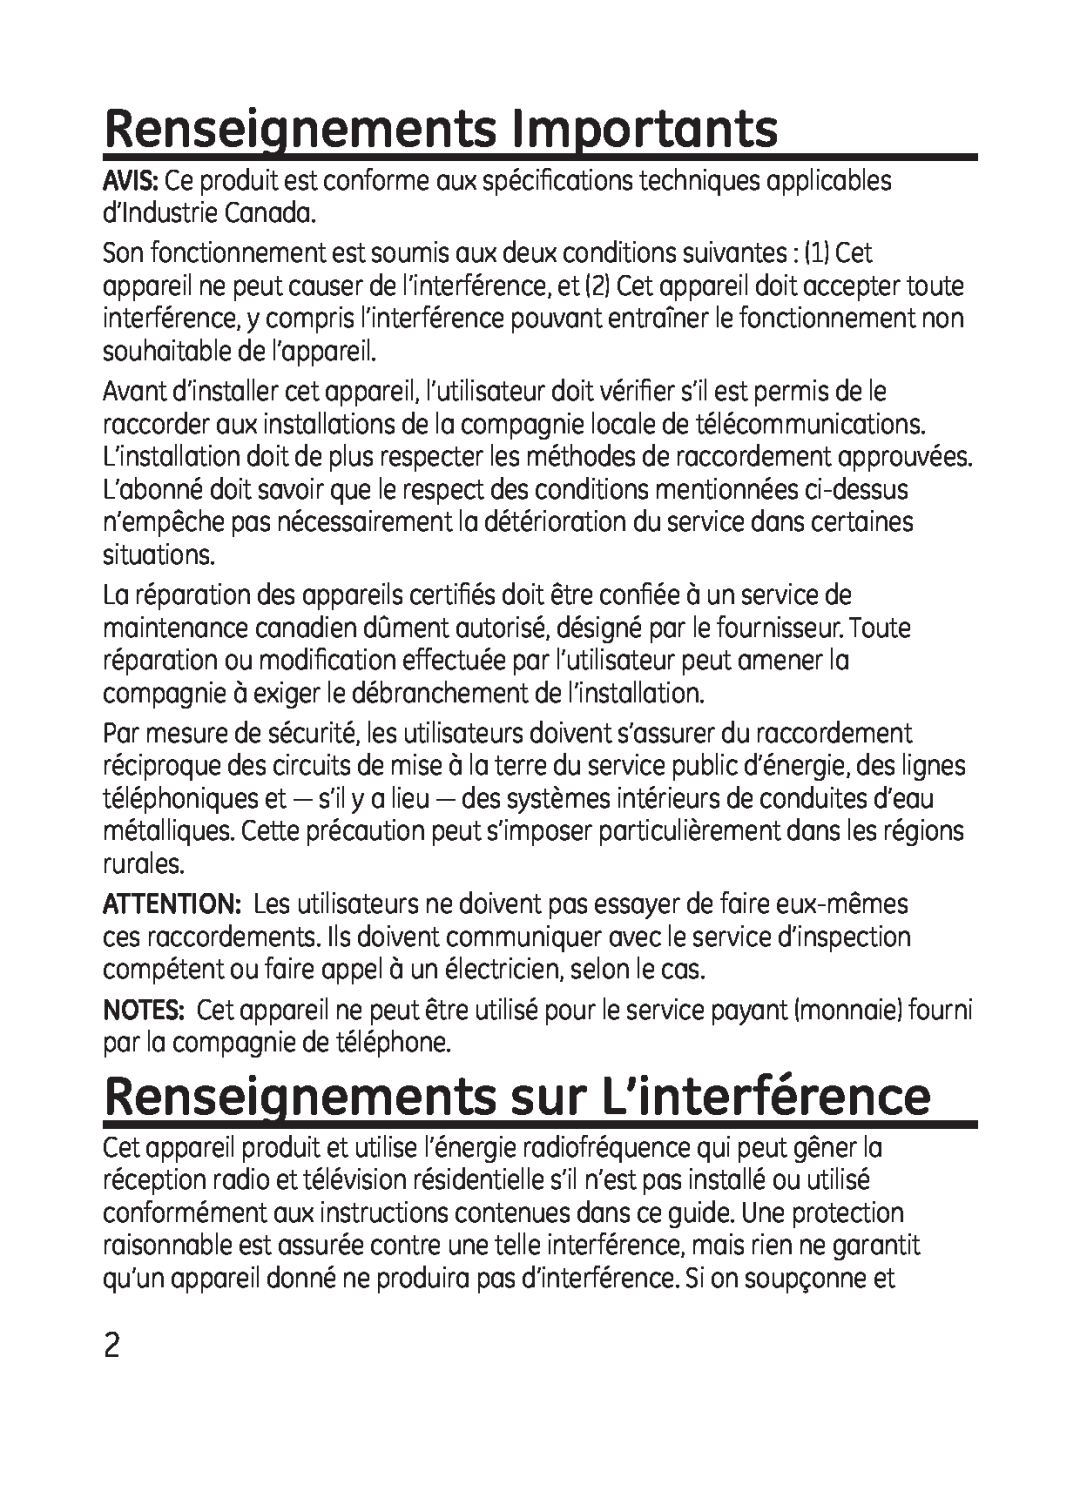 GE 28301 manual Renseignements Importants, Renseignements sur L’interférence 